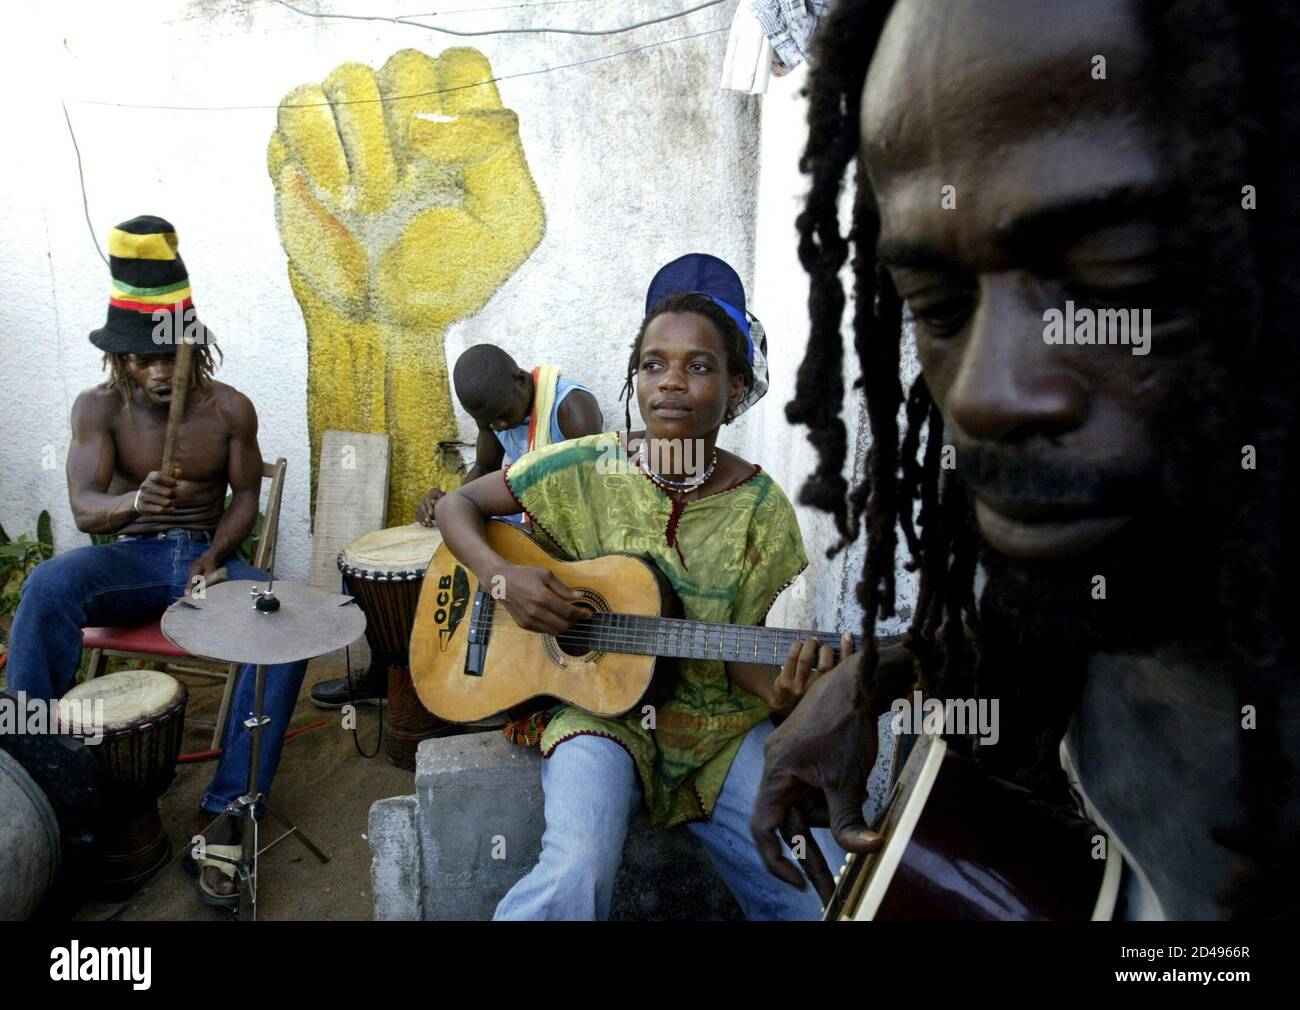 Members of an Ivorian Rastafarian community perform during a music session called 'Naya Bingue' one day before the 24th anniversary of the death of reggae icon Bob Marley at the Rastafarian village of Virdi, south of the Ivorian capital Abidjan, May 10, 2005. Marley died on May 11, 1981. Picture taken May 10, 2005. Stock Photo